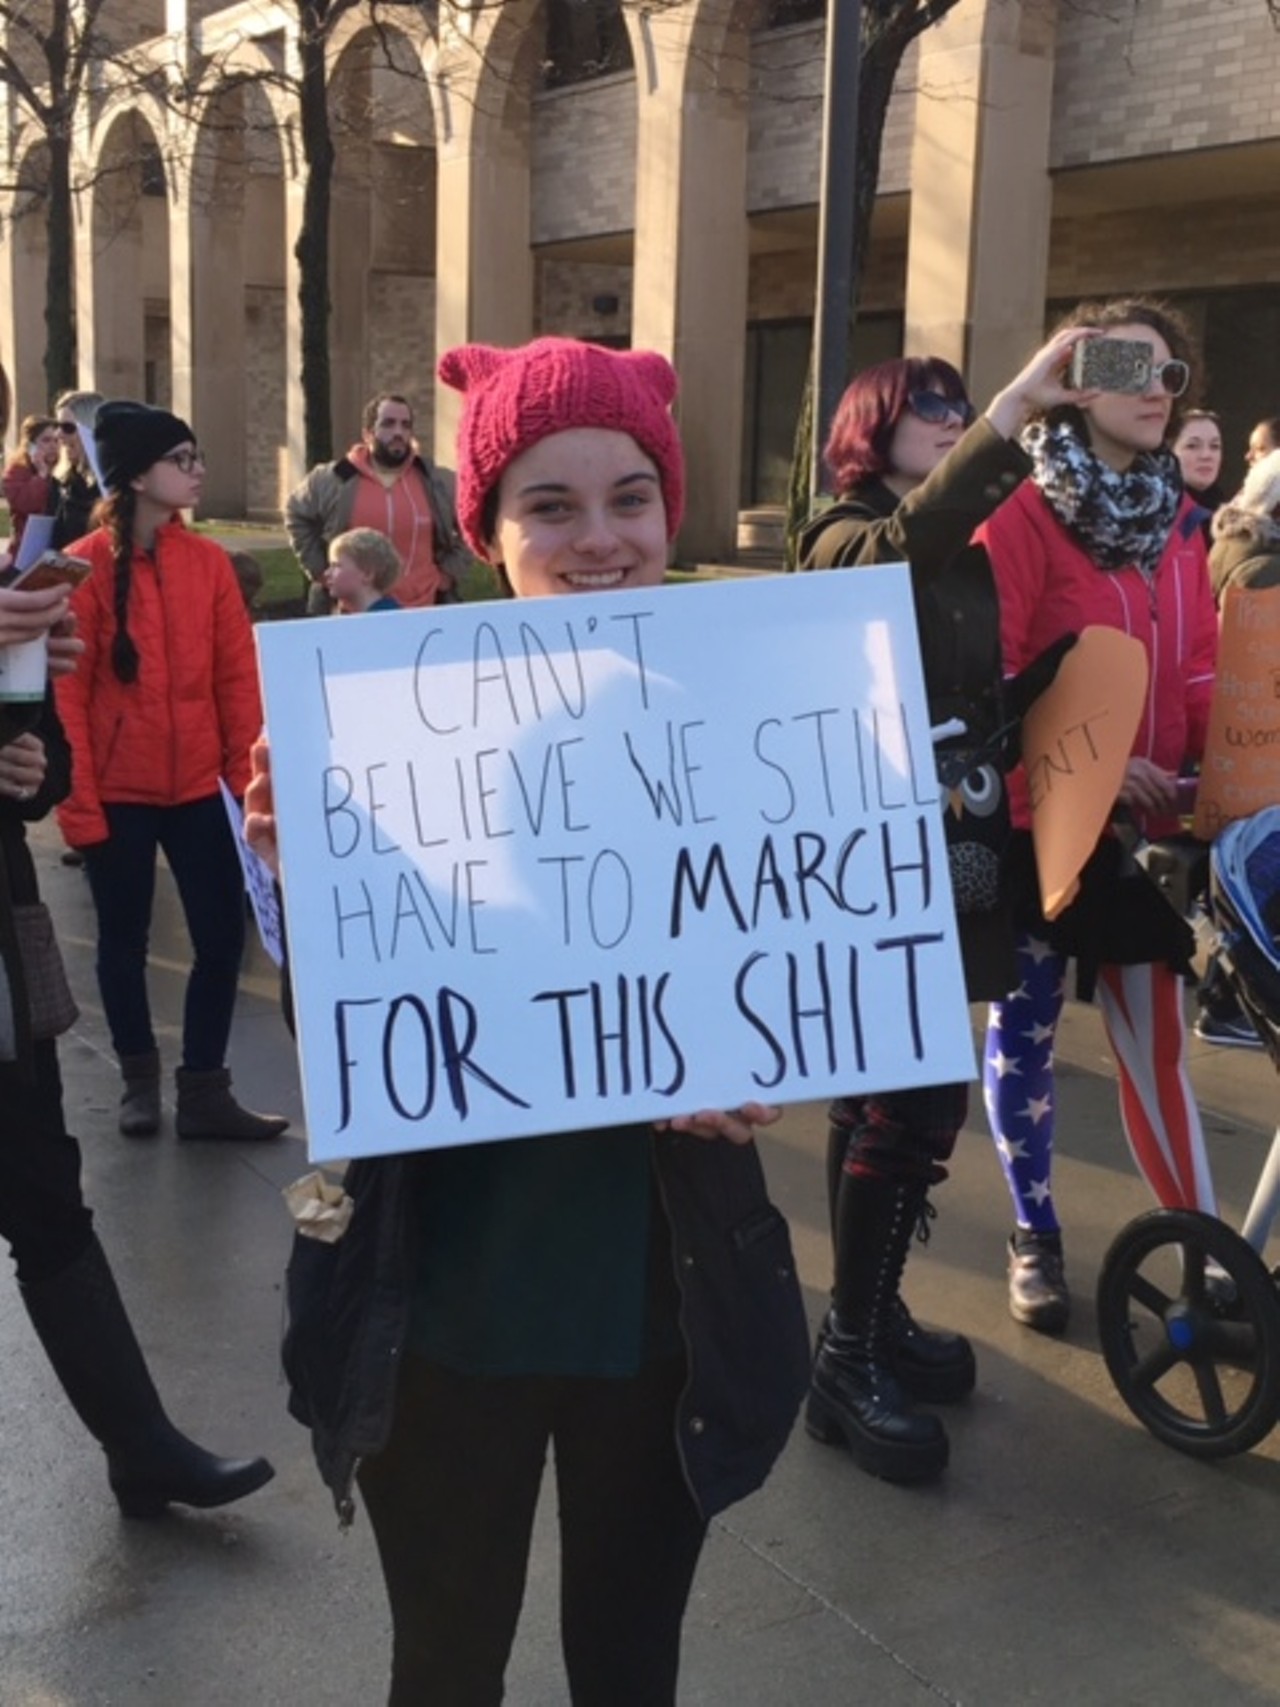 "I can't believe we still have to march for this shit"
Photo by Alex Fluegel